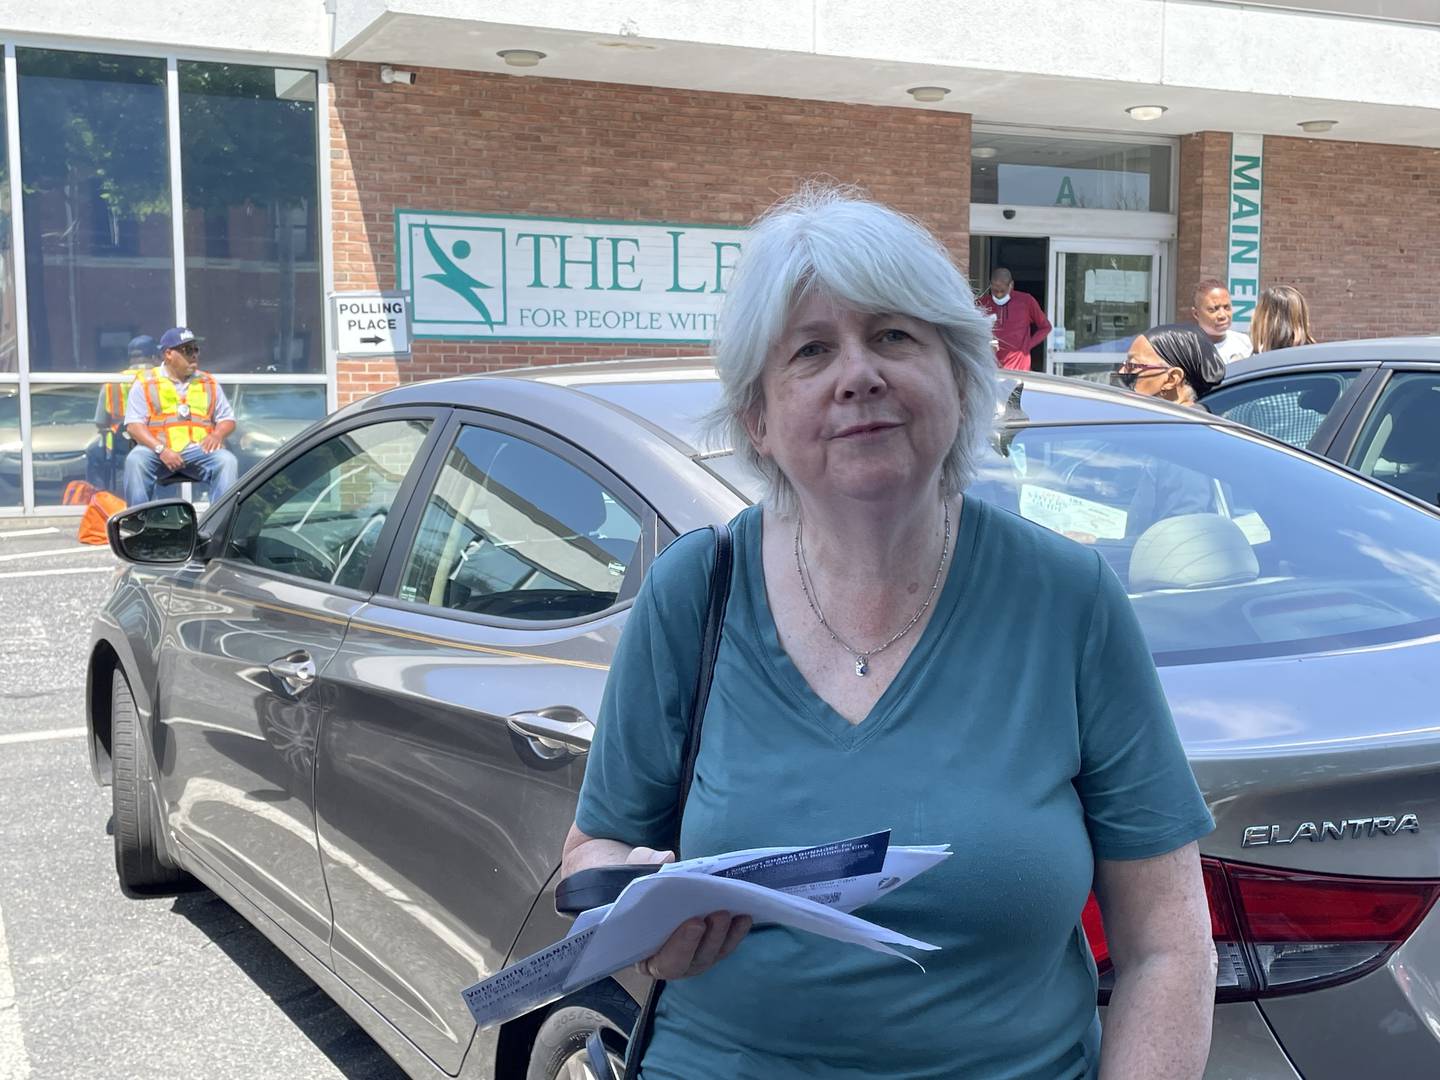 Roland Park voter Kathleen Lasker stands outside a Baltimore City early voting station at the League for People with Disabilities on East Cold Spring Lane Monday, July 11.